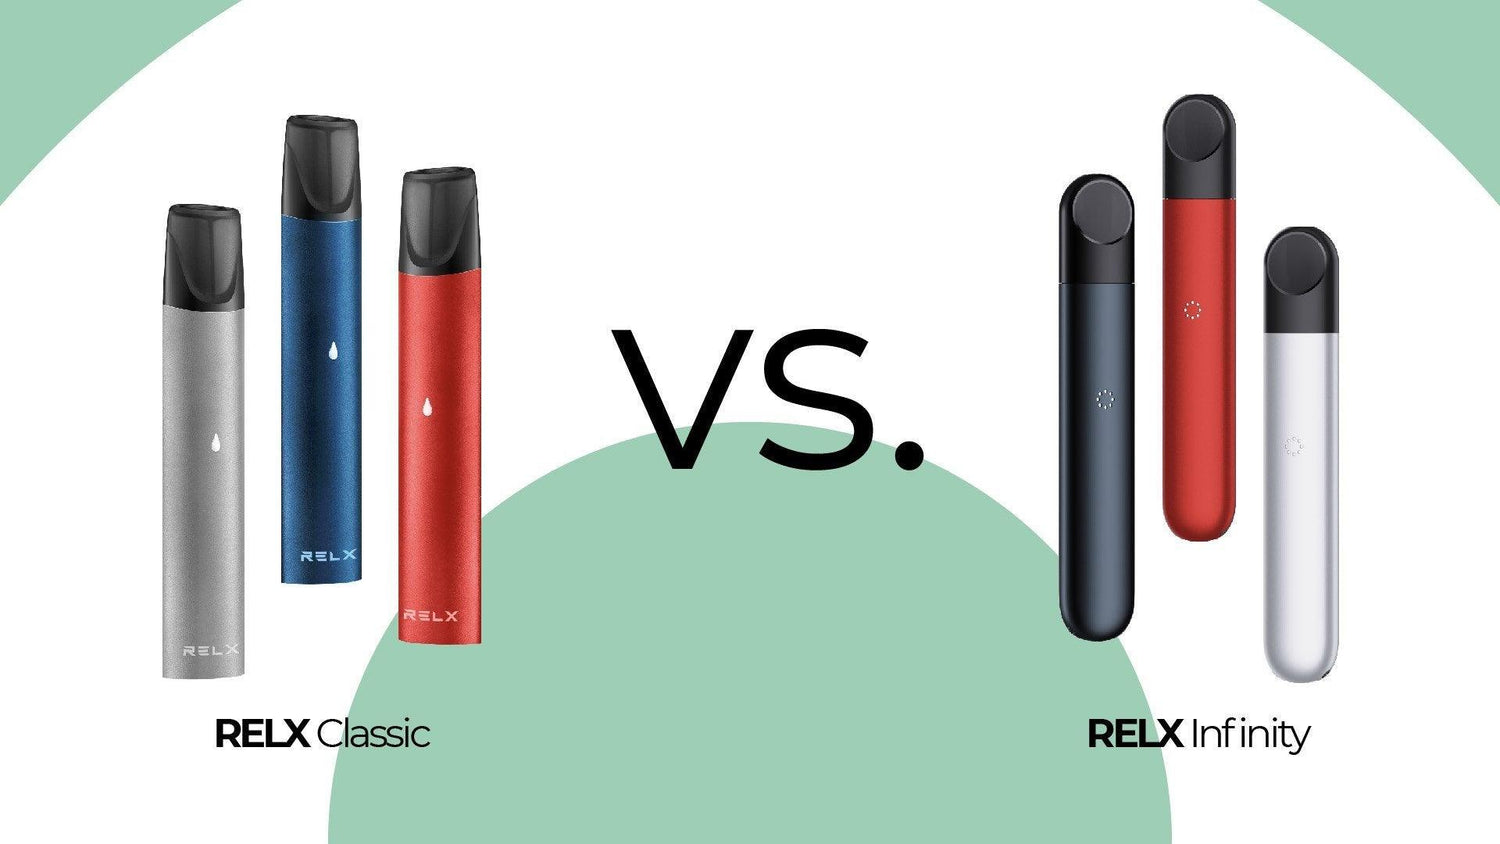 RELX Classic vs. RELX Infinity: Which Should You Choose? - RELX UK